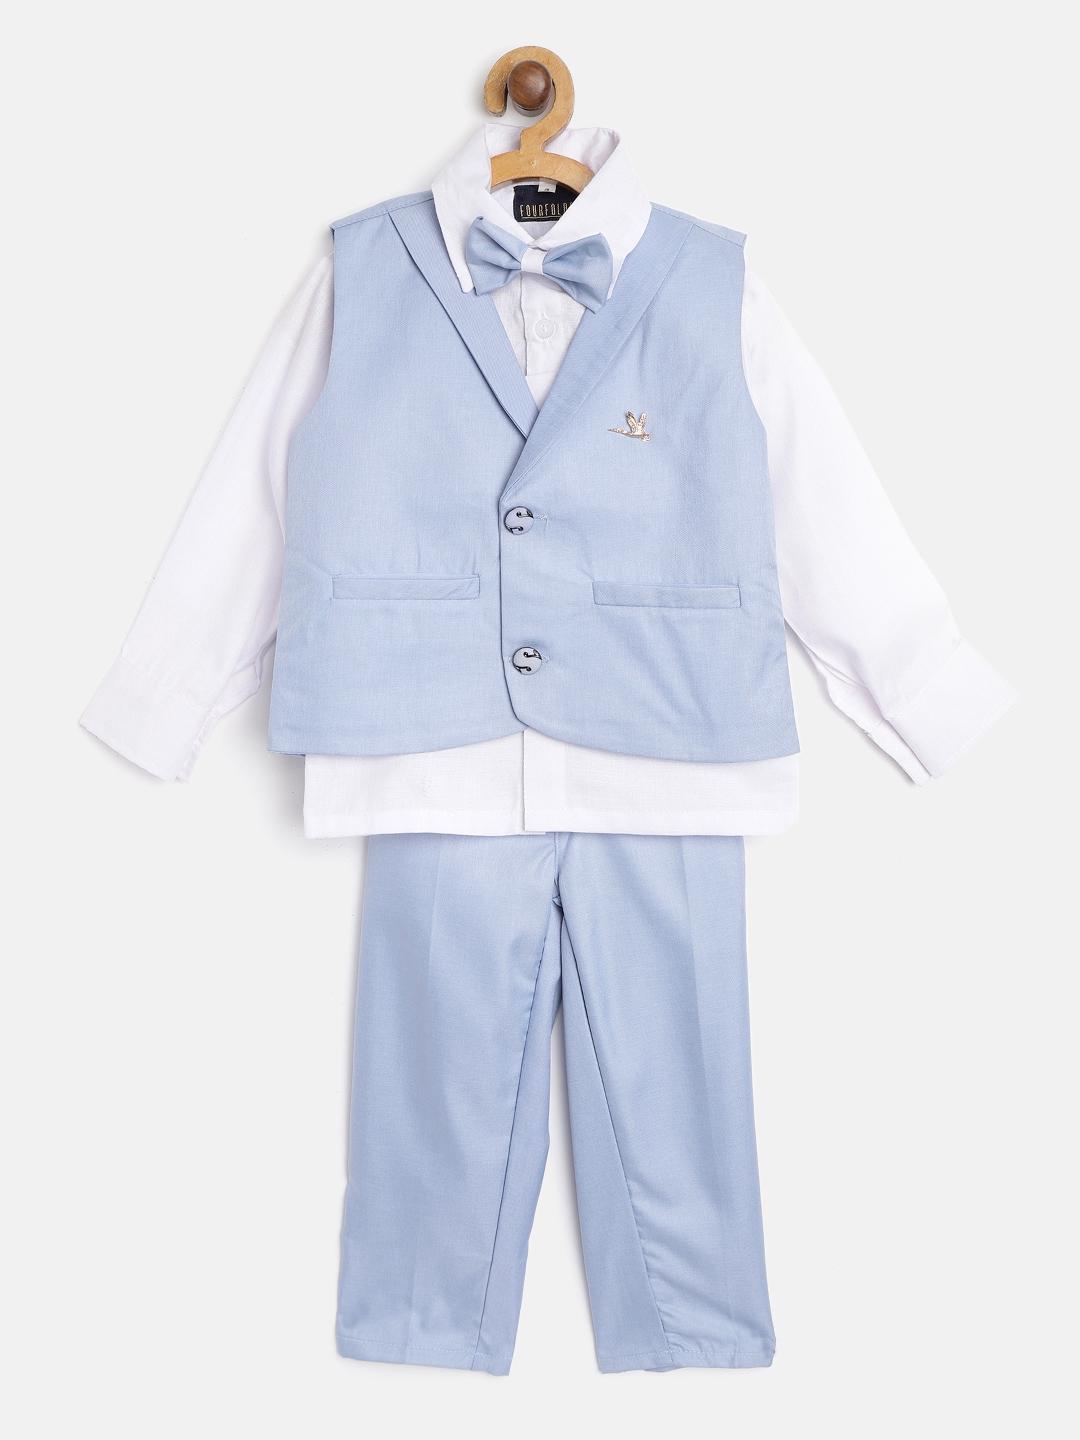 FOURFOLDS Boys White & Blue Solid Clothing Set with Waistcoat & Bow-Tie